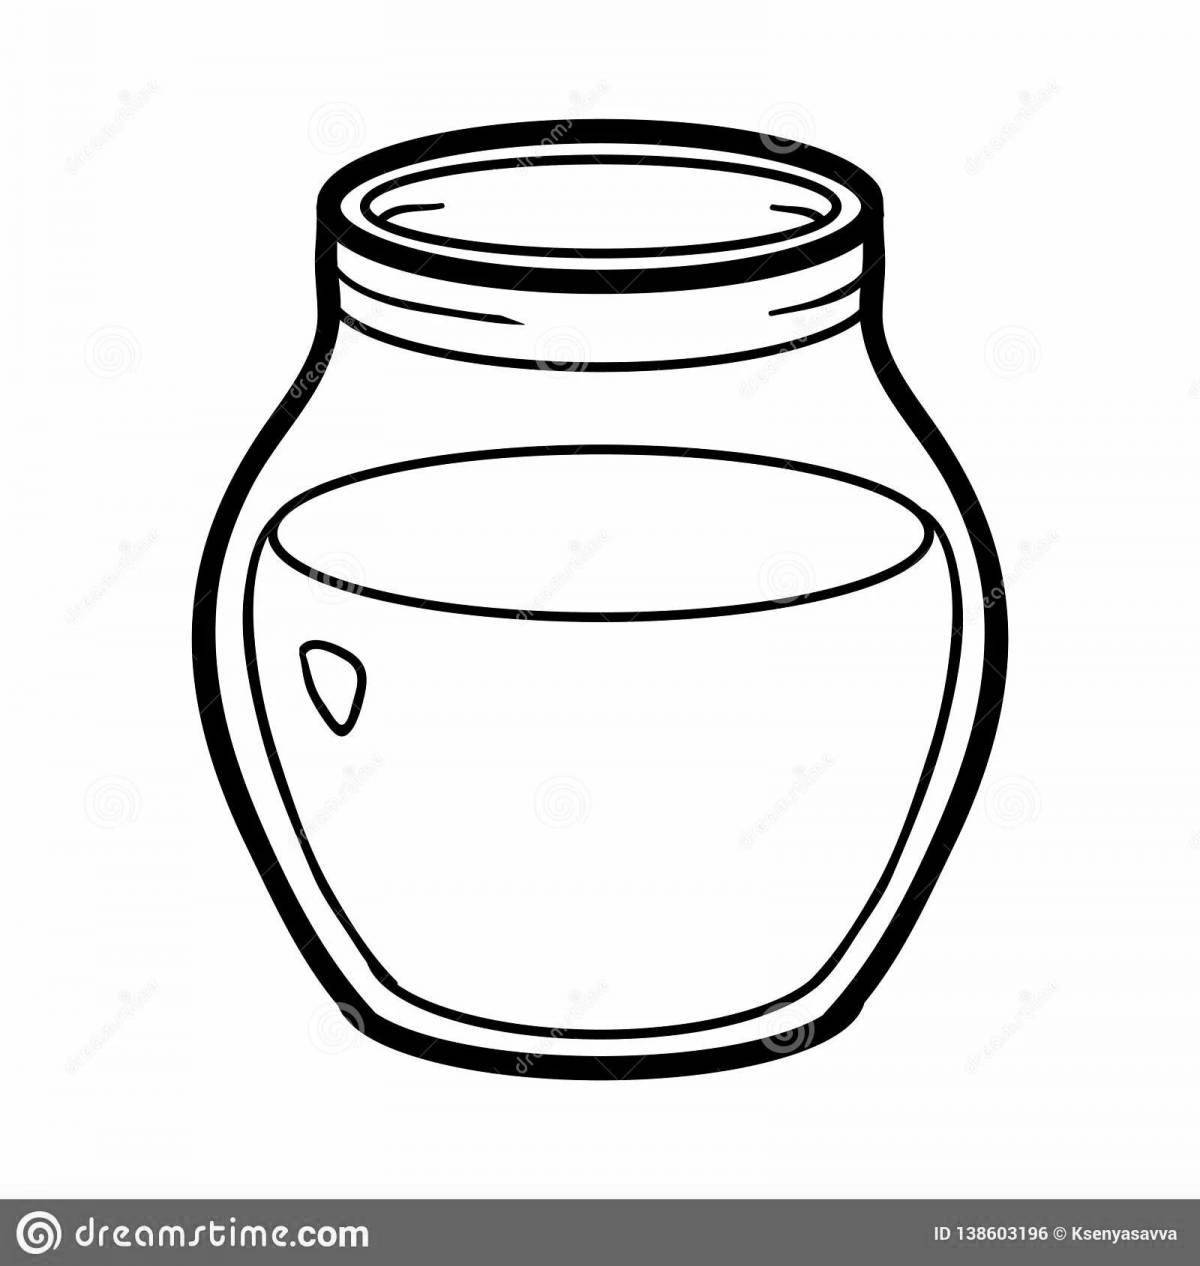 Playful empty glass jar coloring page for kids